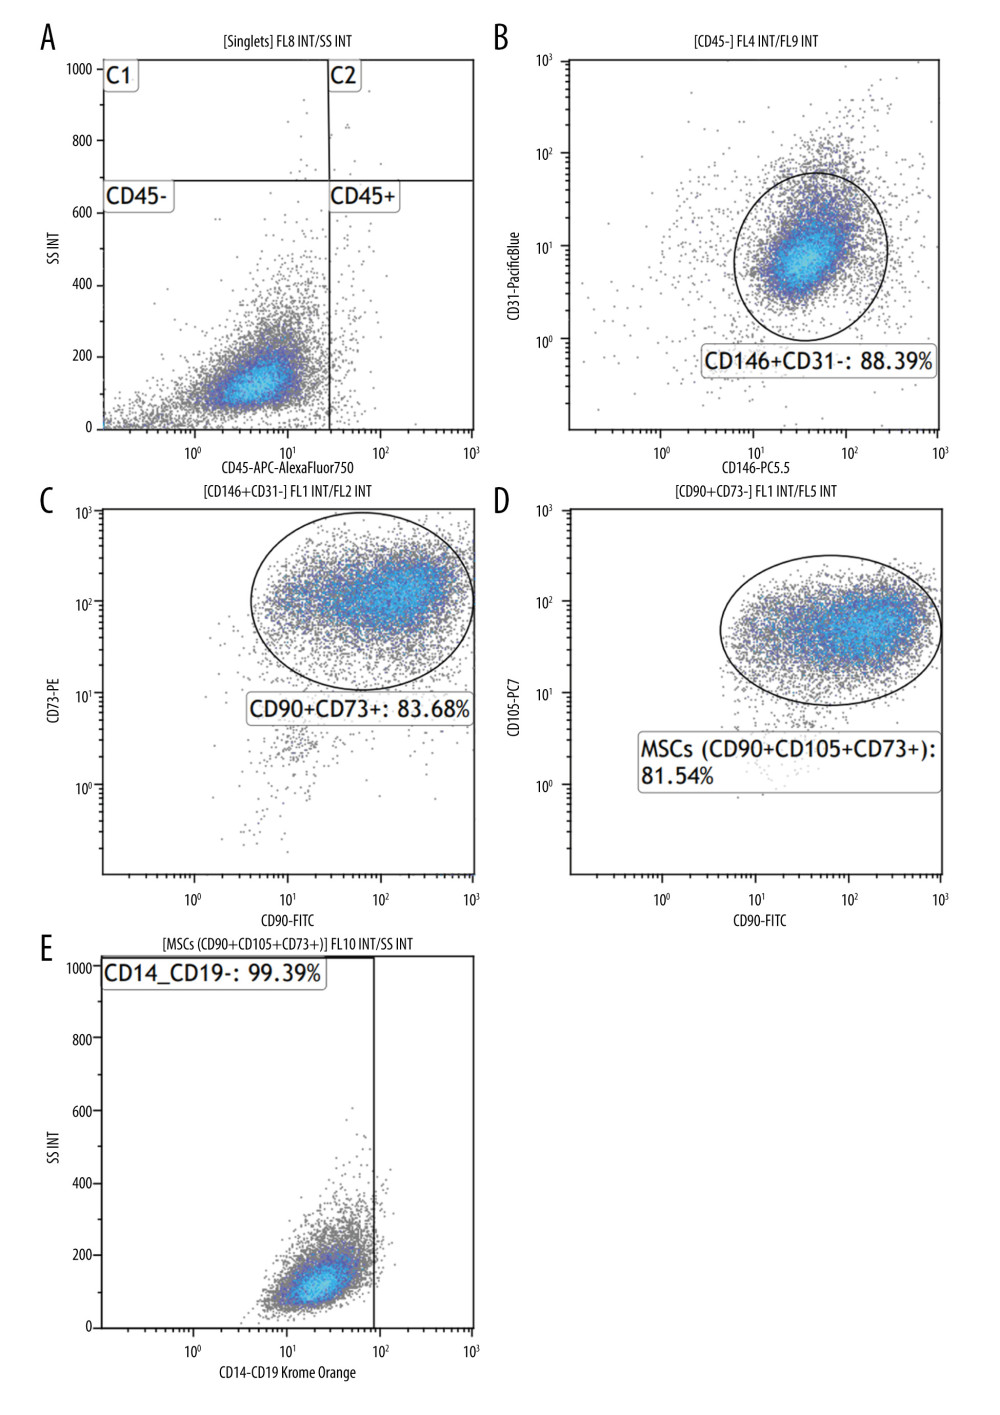 Cytometric evaluation of the expression of CD146, CD73, CD90, and CD105 surface antigens on the tested cells. DuraClone SC Mesenchymal Tube antibodies, Navios cytometer (Beckman Coulter). Sample immunophenotype analysis of umbilical cord-derived mesenchymal stem cells (MSCs) after in vitro culture. (A) Cytogram: cell population negative for CD45 antigen (CD45−). (B) Cytogram: percentage of CD31-negative and CD146-positive cells (CD146+CD31−). (C) Cytogram: percentage of cell population expressing CD90 antigen and CD73 antigen (CD90+CD73+). (D) Cytogram: percentage of umbilical cord MSCs positive for CD90, CD105, CD73 (CD90+CD105+CD73+). (E) MSC positive for CD90, CD105, CD73 and negative for CD14 and CD19 (CD90+CD105+CD73+CD14−CD19−).